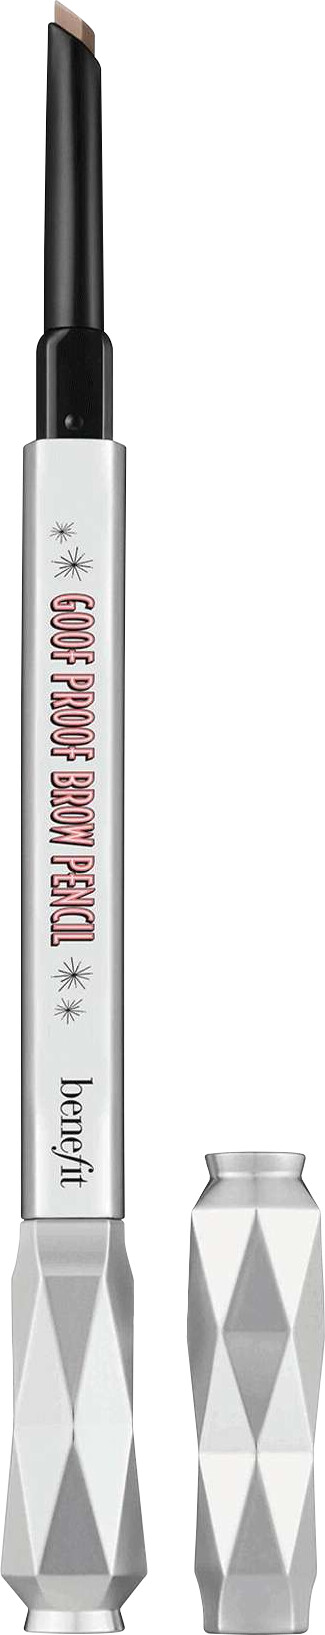 Benefit Goof Proof Brow Pencil 0.34g 2.5 - Neutral Blonde